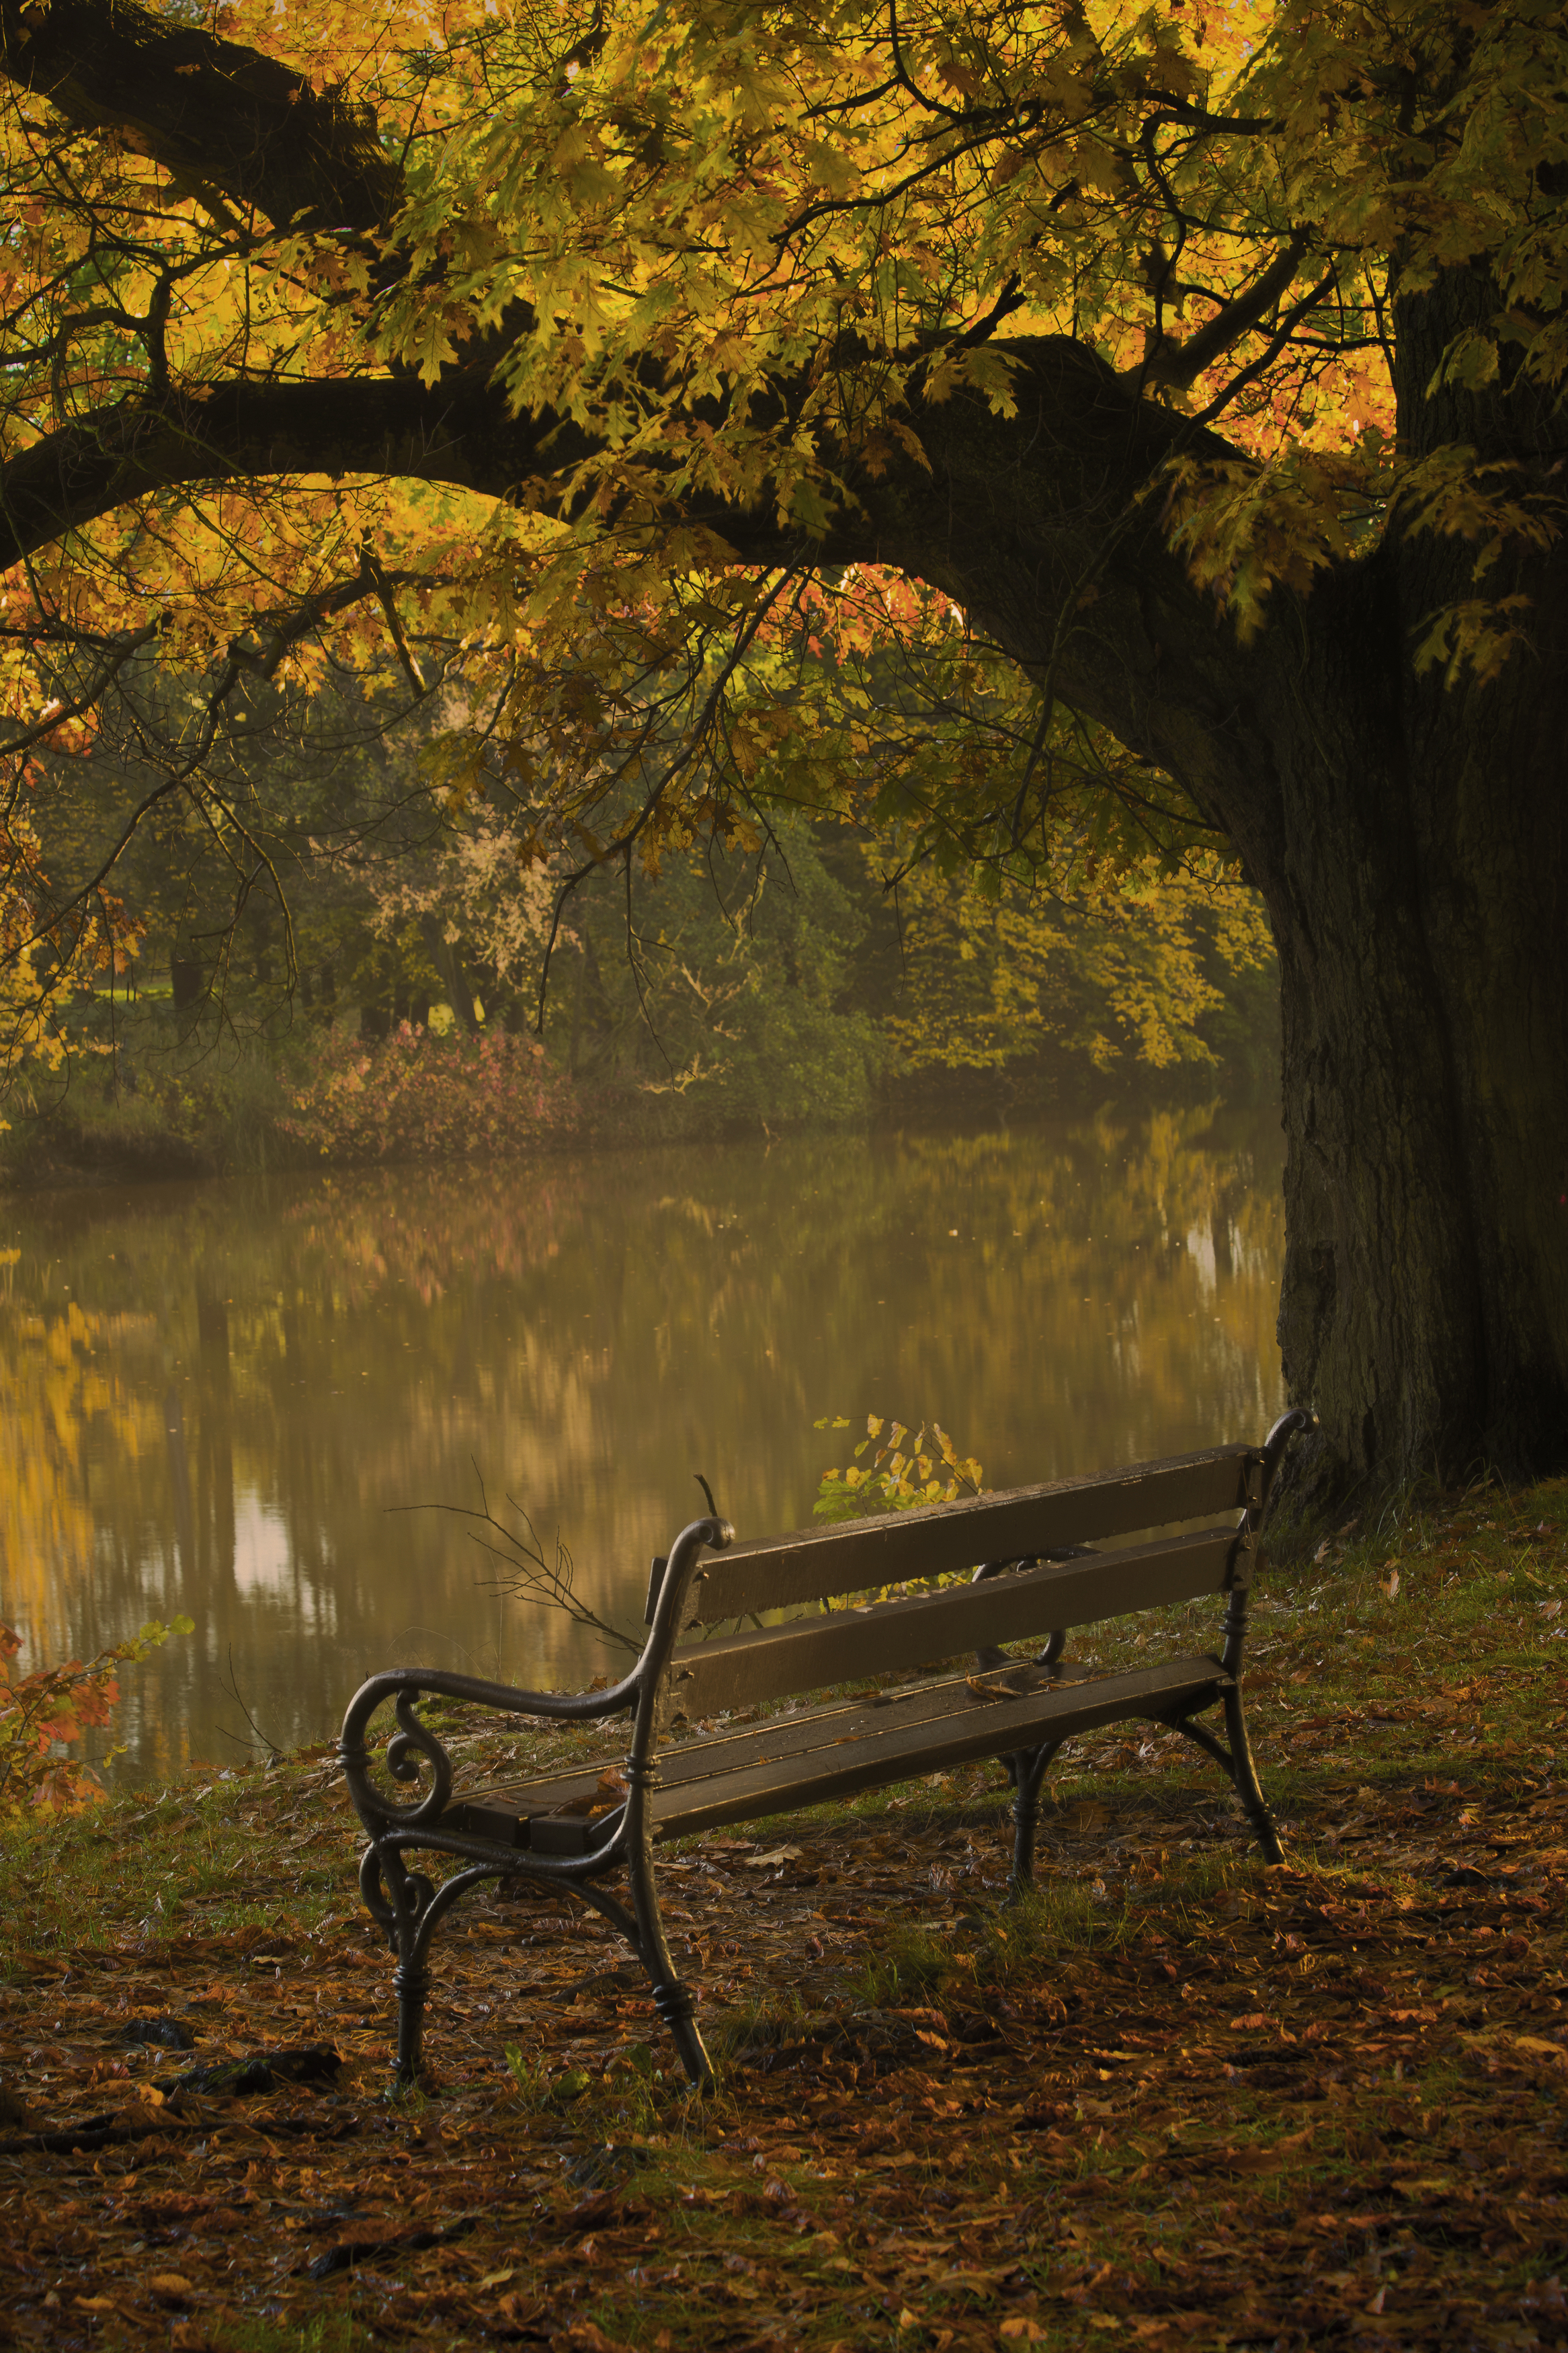 Vertical, Tree, Day, Bench, Tranquility, Nature, Autumn, PublicPark, Nature, Water, Park, Gold, Walking, Fog, Morning, Damian Cyfka